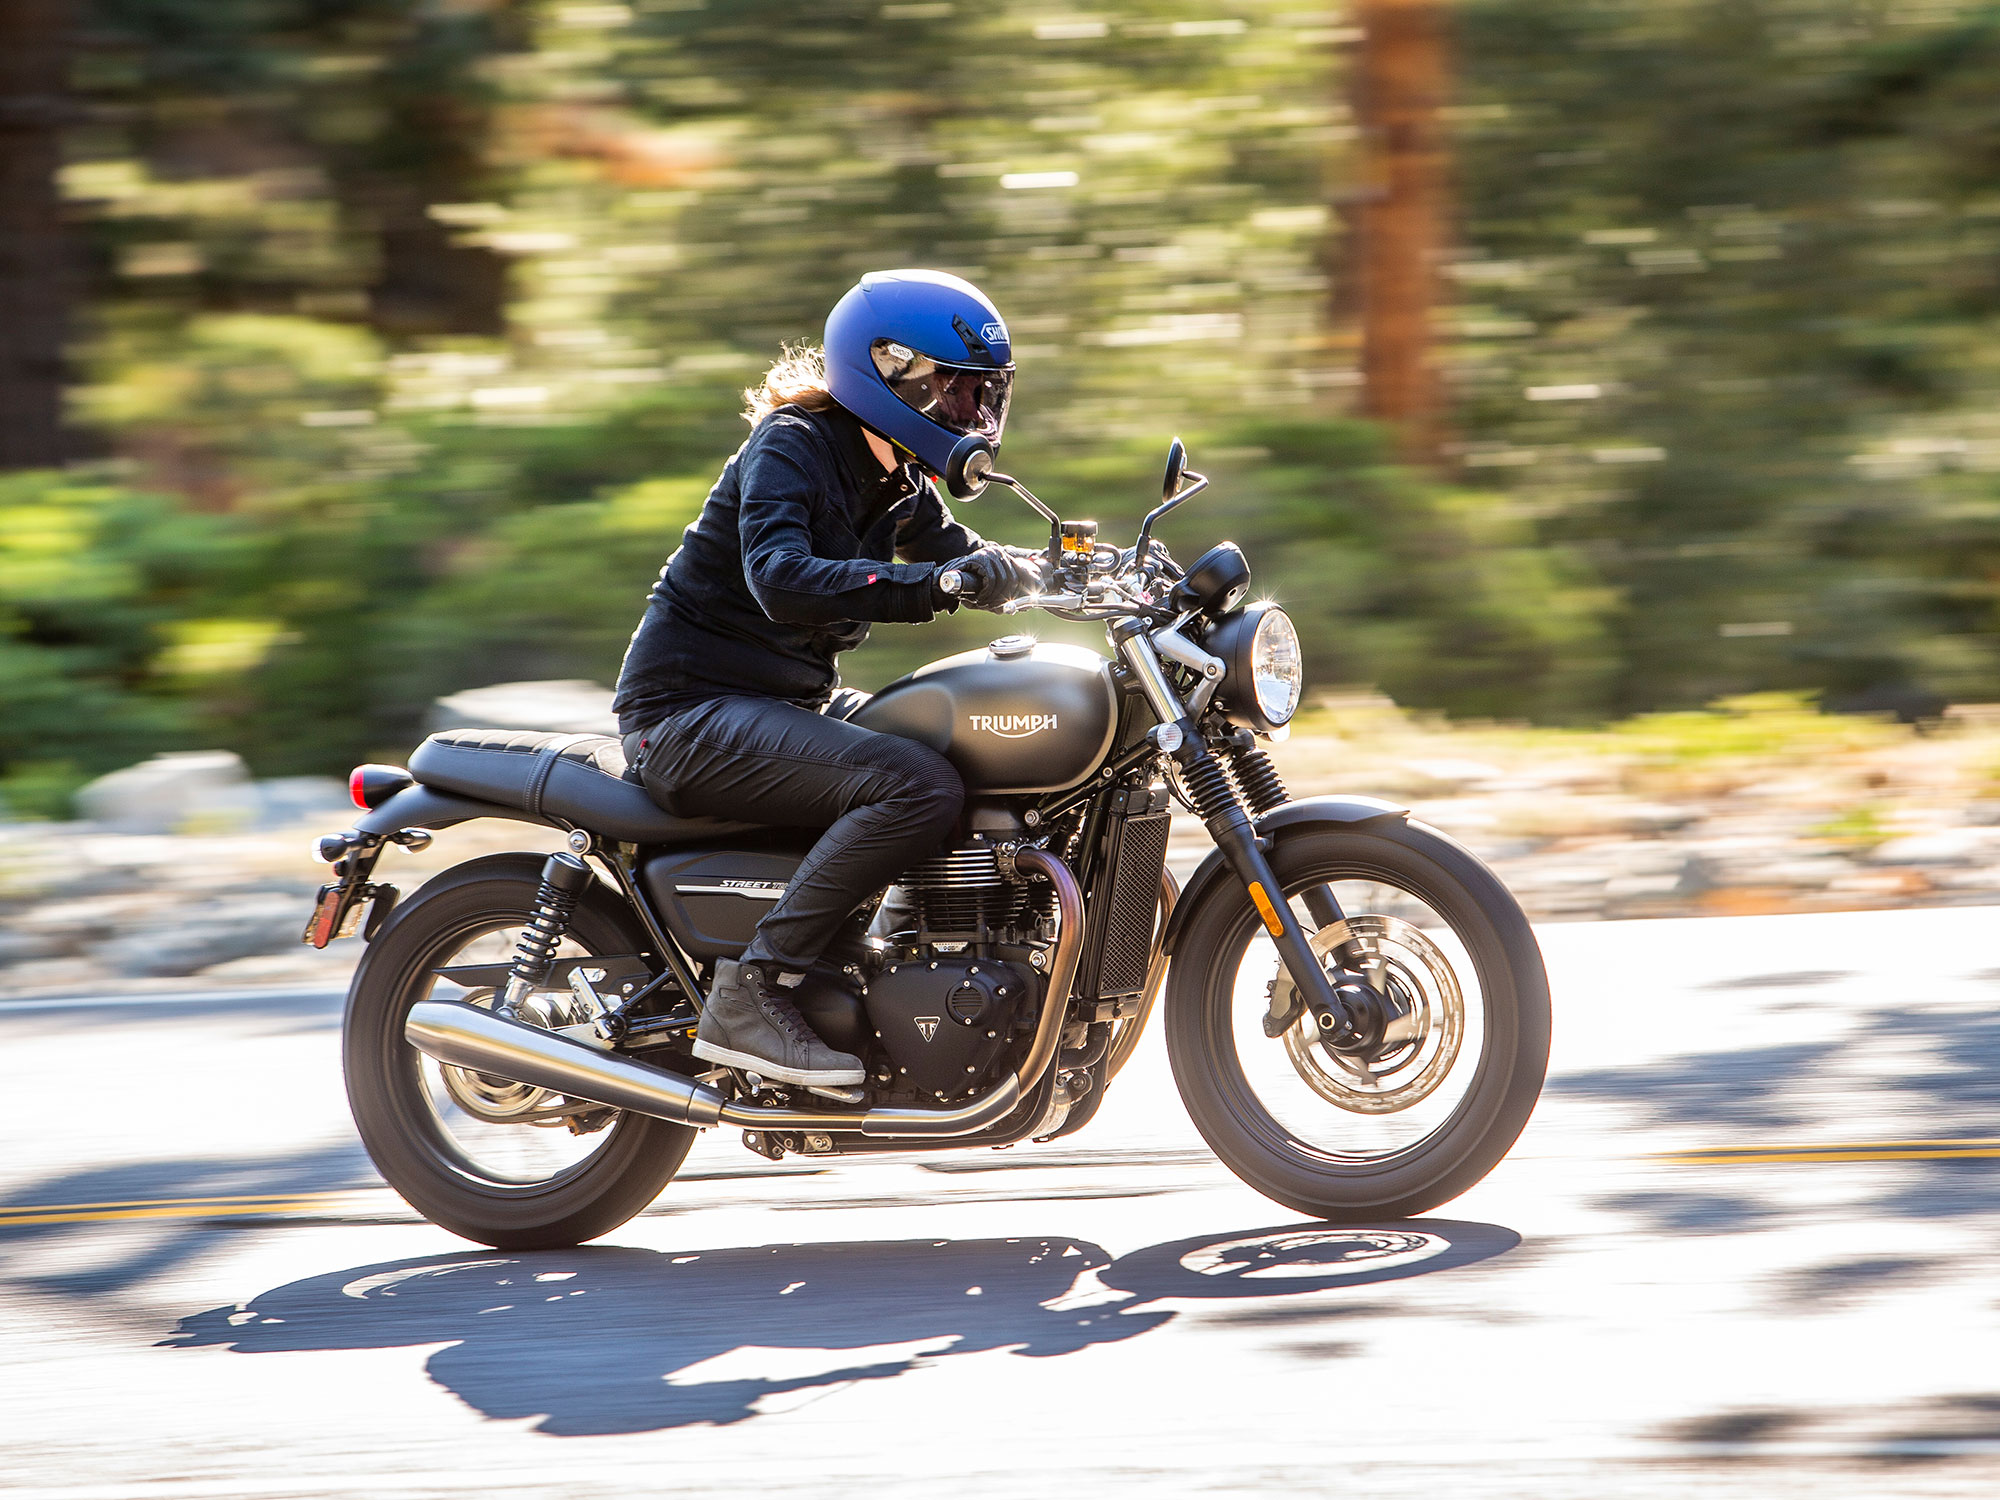 2019 Triumph Street Twin Review  Worth The Price Or Not